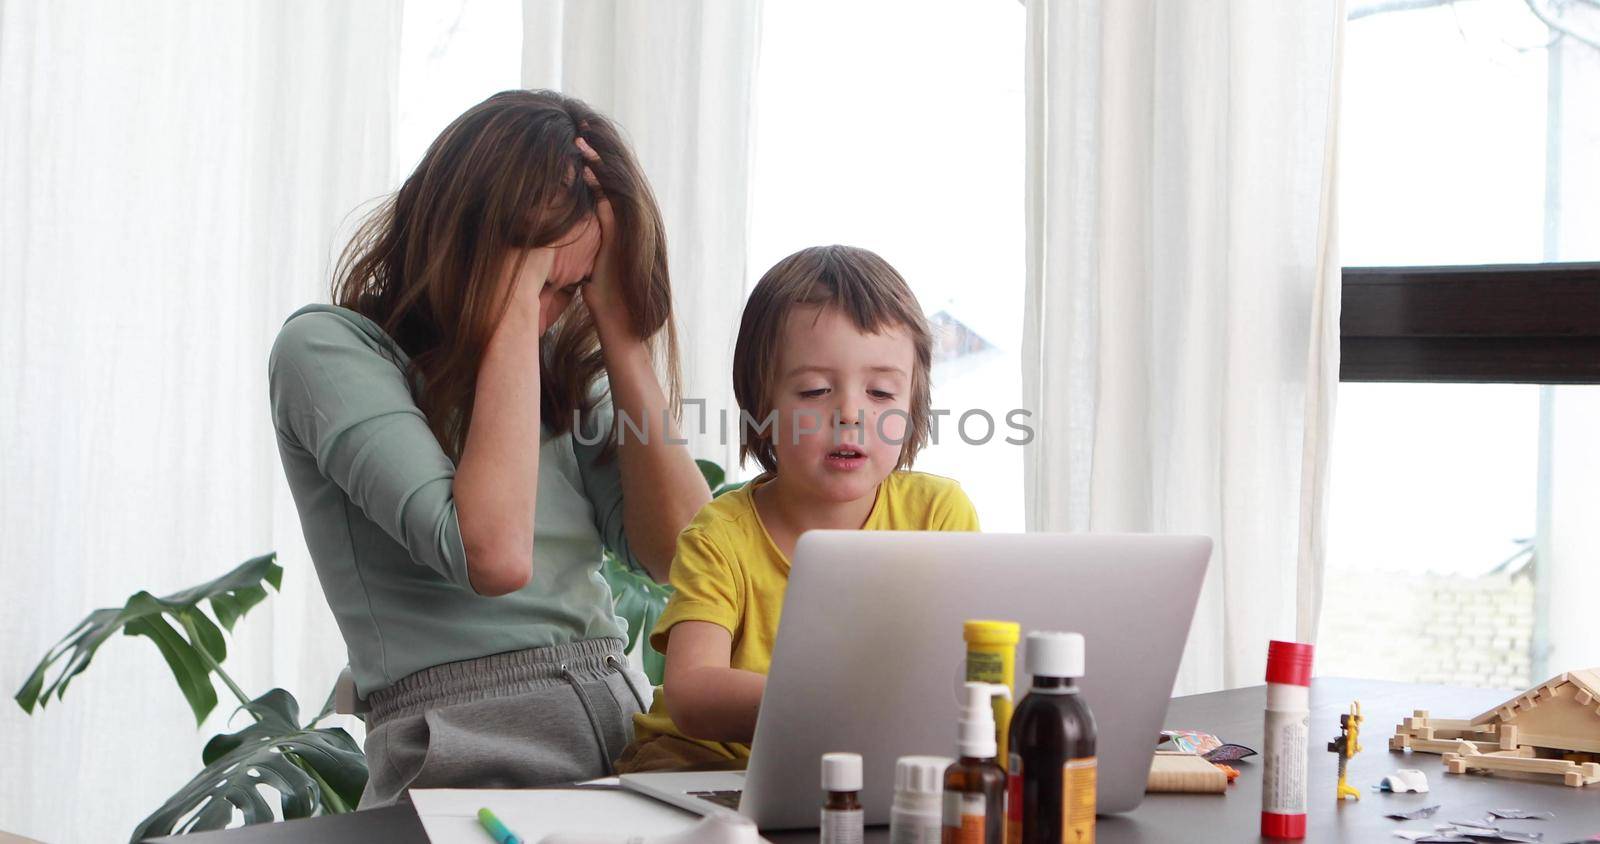 Tired woman clutches head while working at home while little boy presses keys on laptop keyboard at table with pharmacy bottles